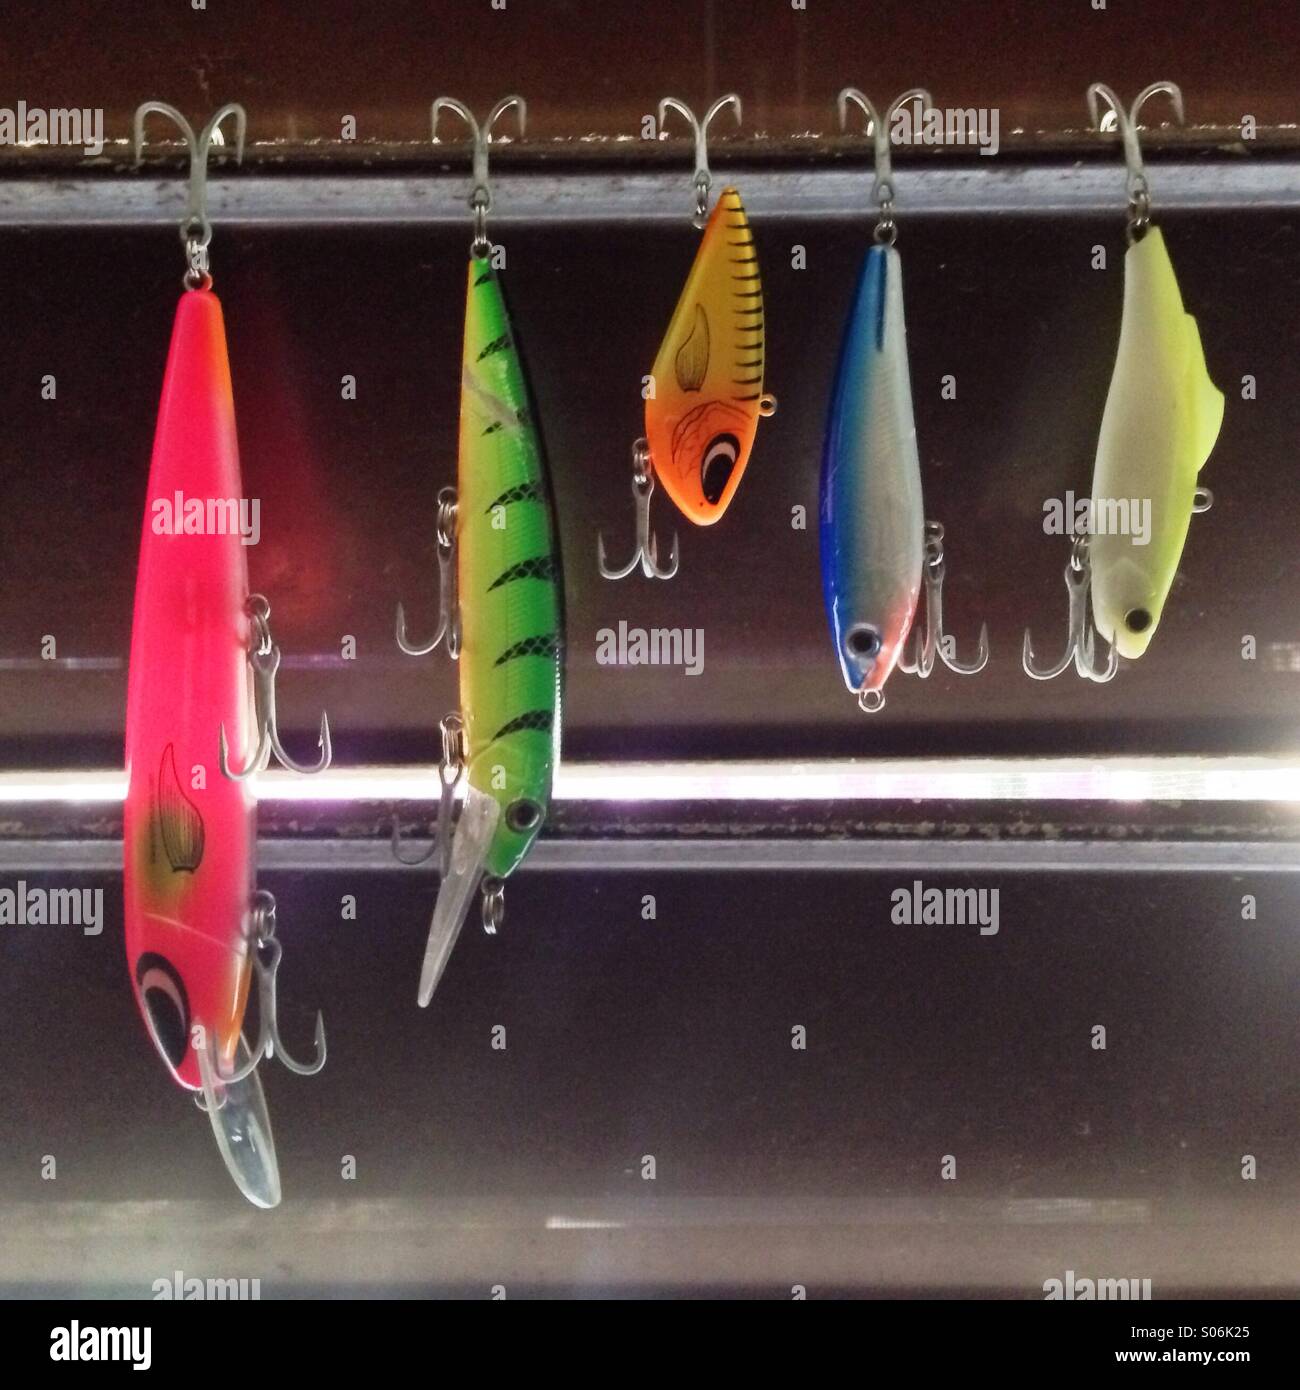 Fishing lures drying after a fishing session. Stock Photo